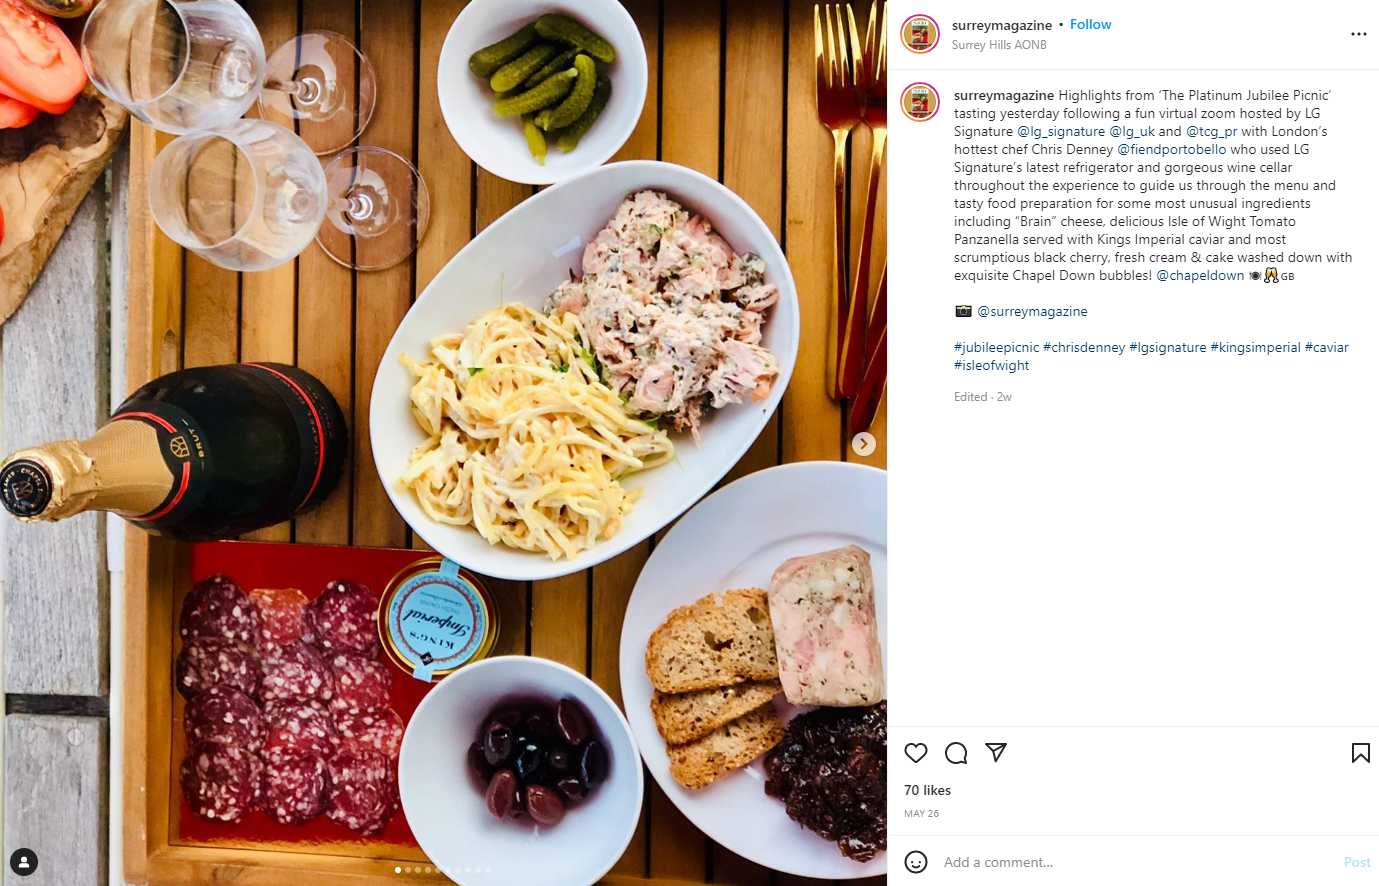 An Instagram post of an influencer who participated in the virtual LG SIGNATURE event for Platinum Jubilee celebration with a pohto of delicious plate made with food from the luxurious picnic hamper for the event